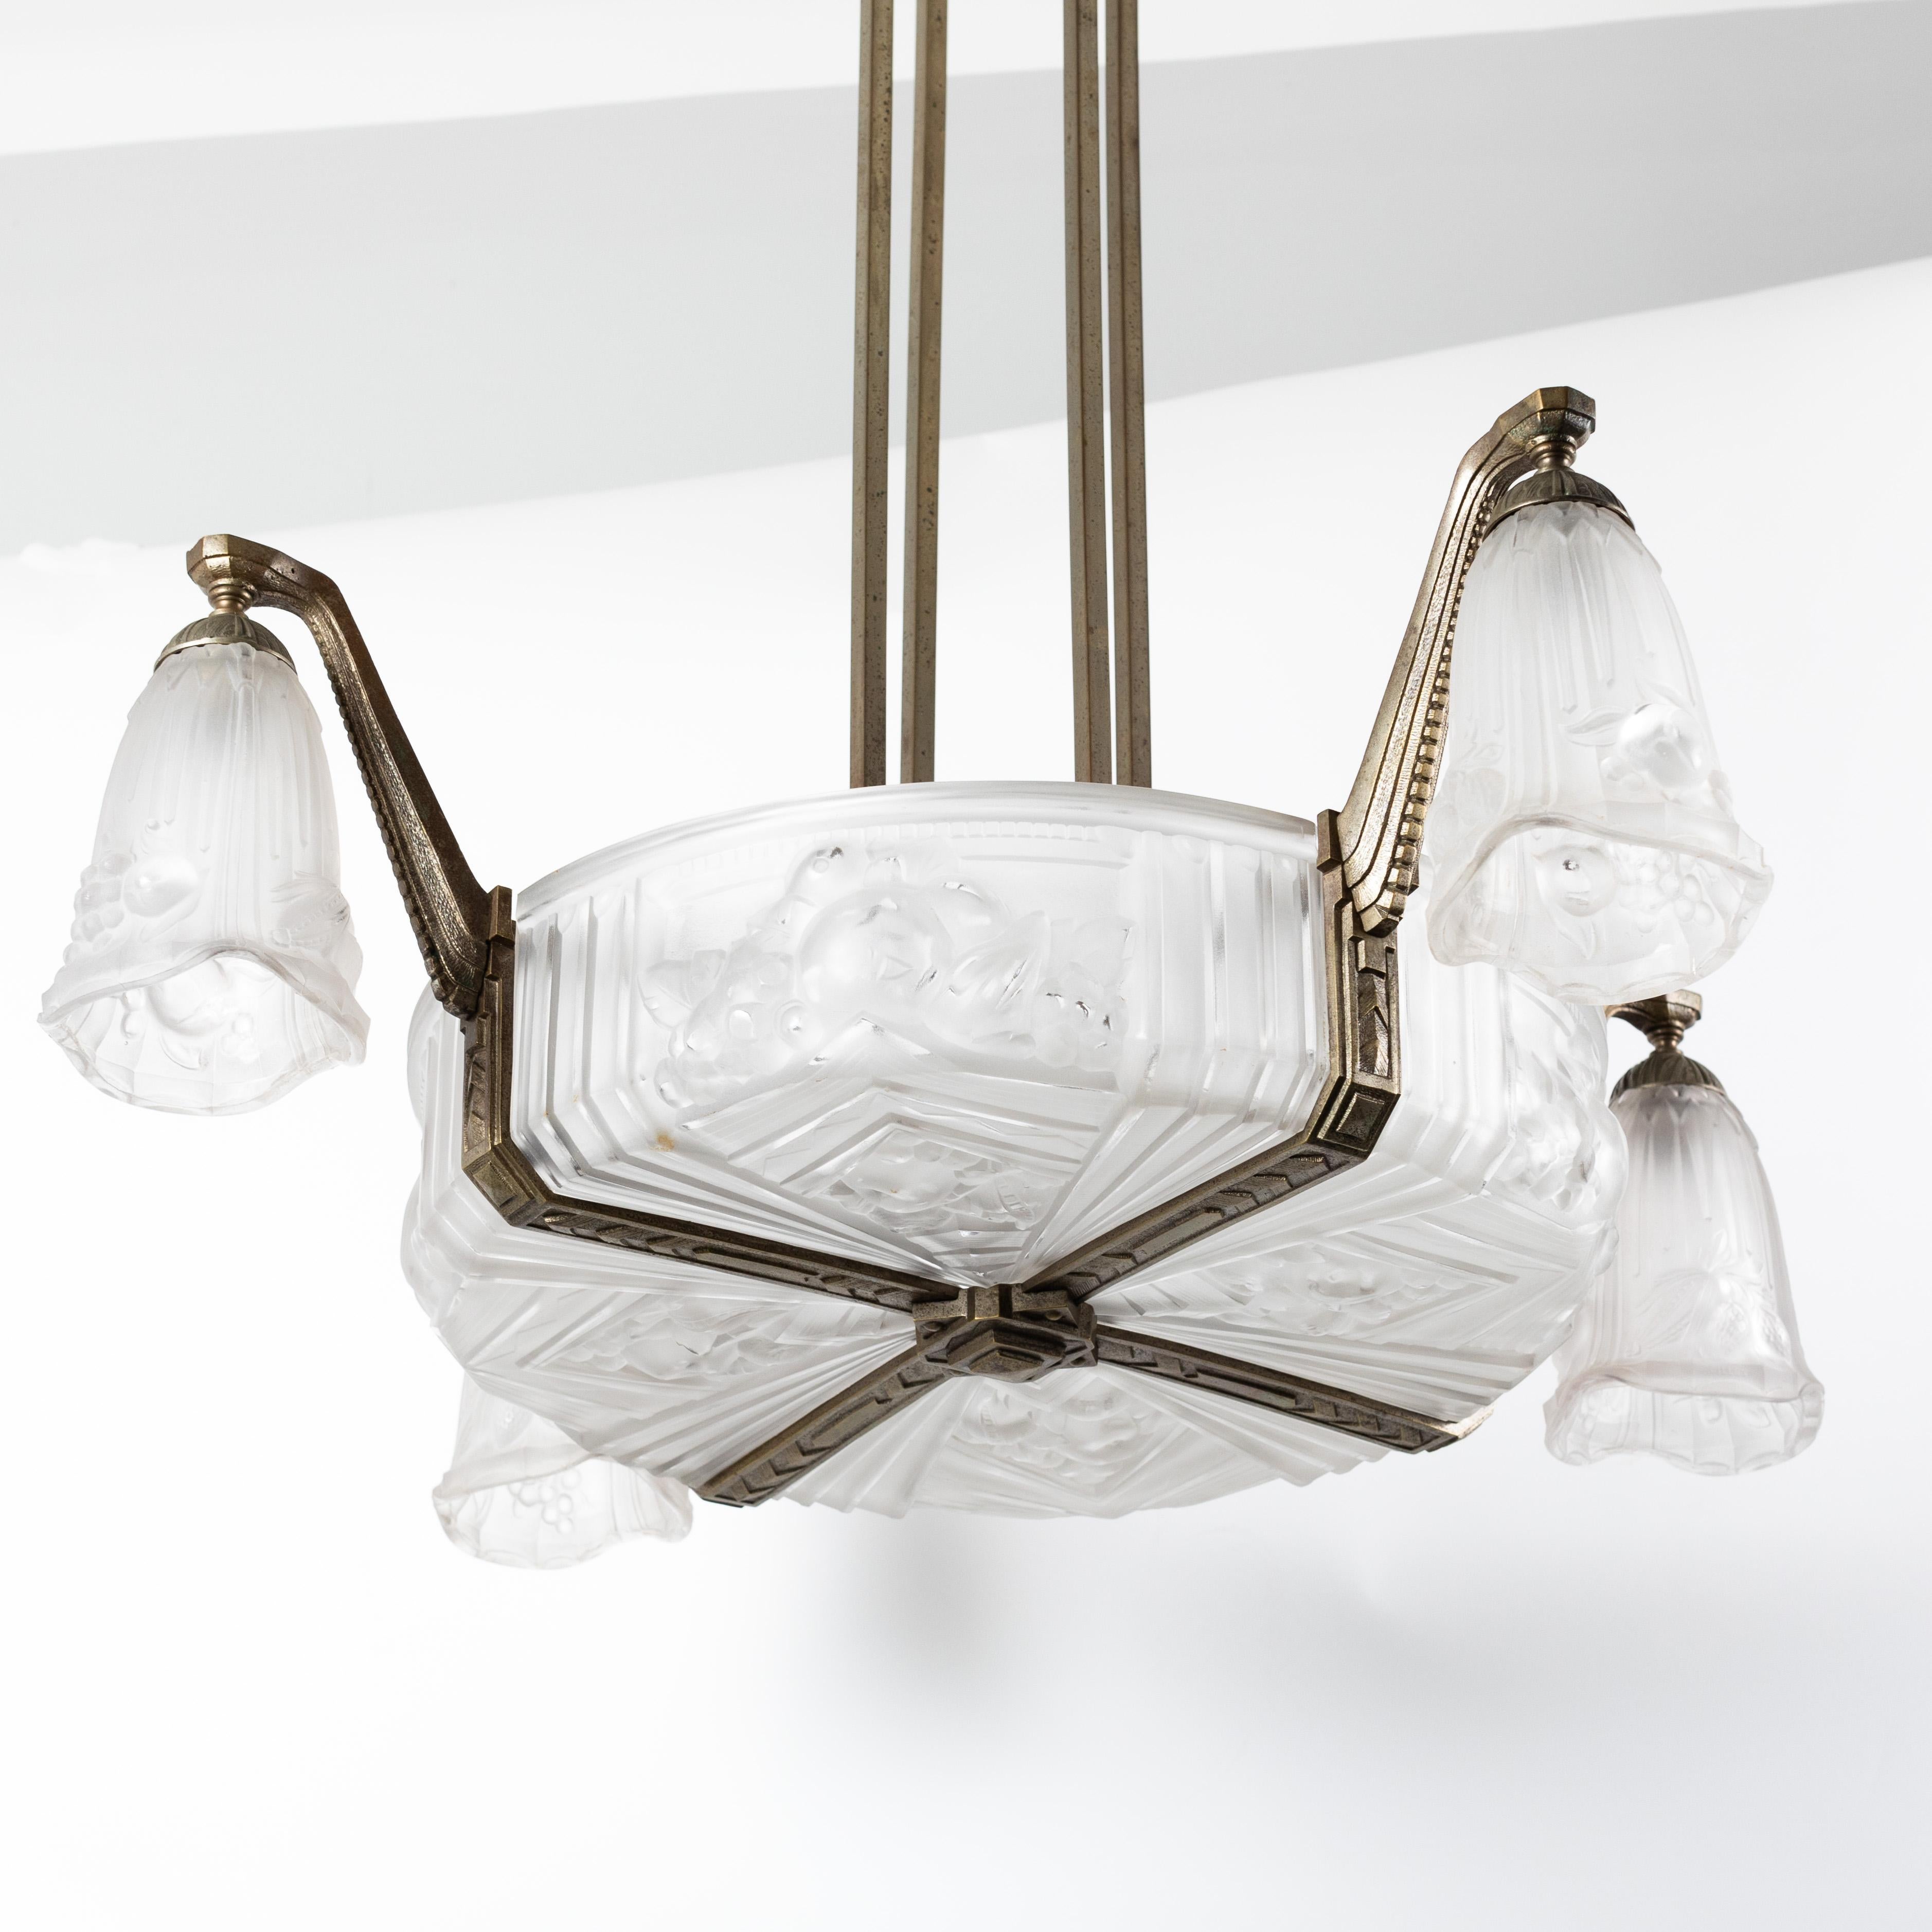 Metalwork French Art Déco chandelier Pressed Glass and Cast Iron by Pierre Gilles 1925 For Sale